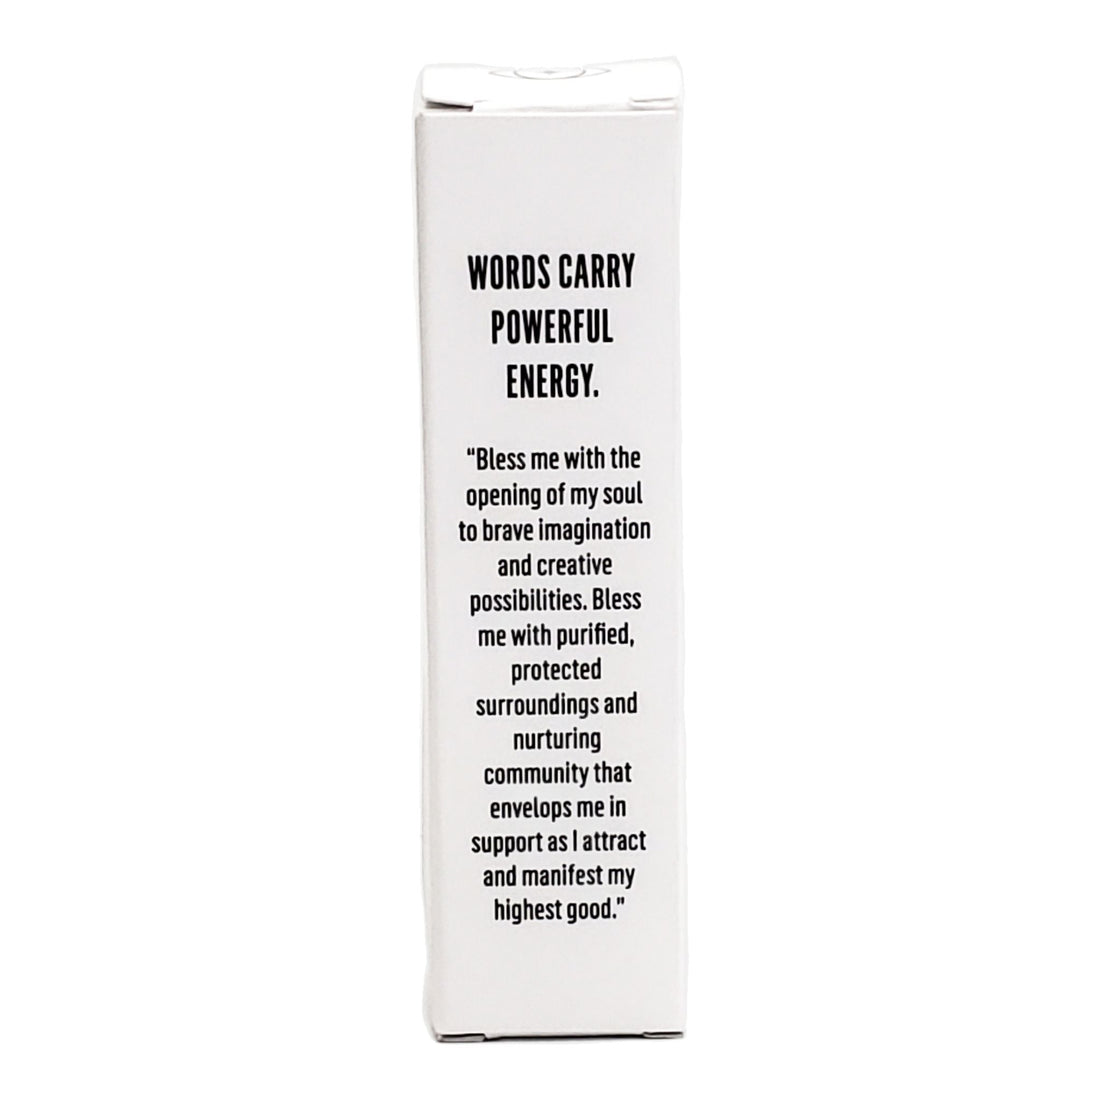 "Bless me with New Opportunities" Affirmation Rollerball Affirmation Roll On House of Intuition 